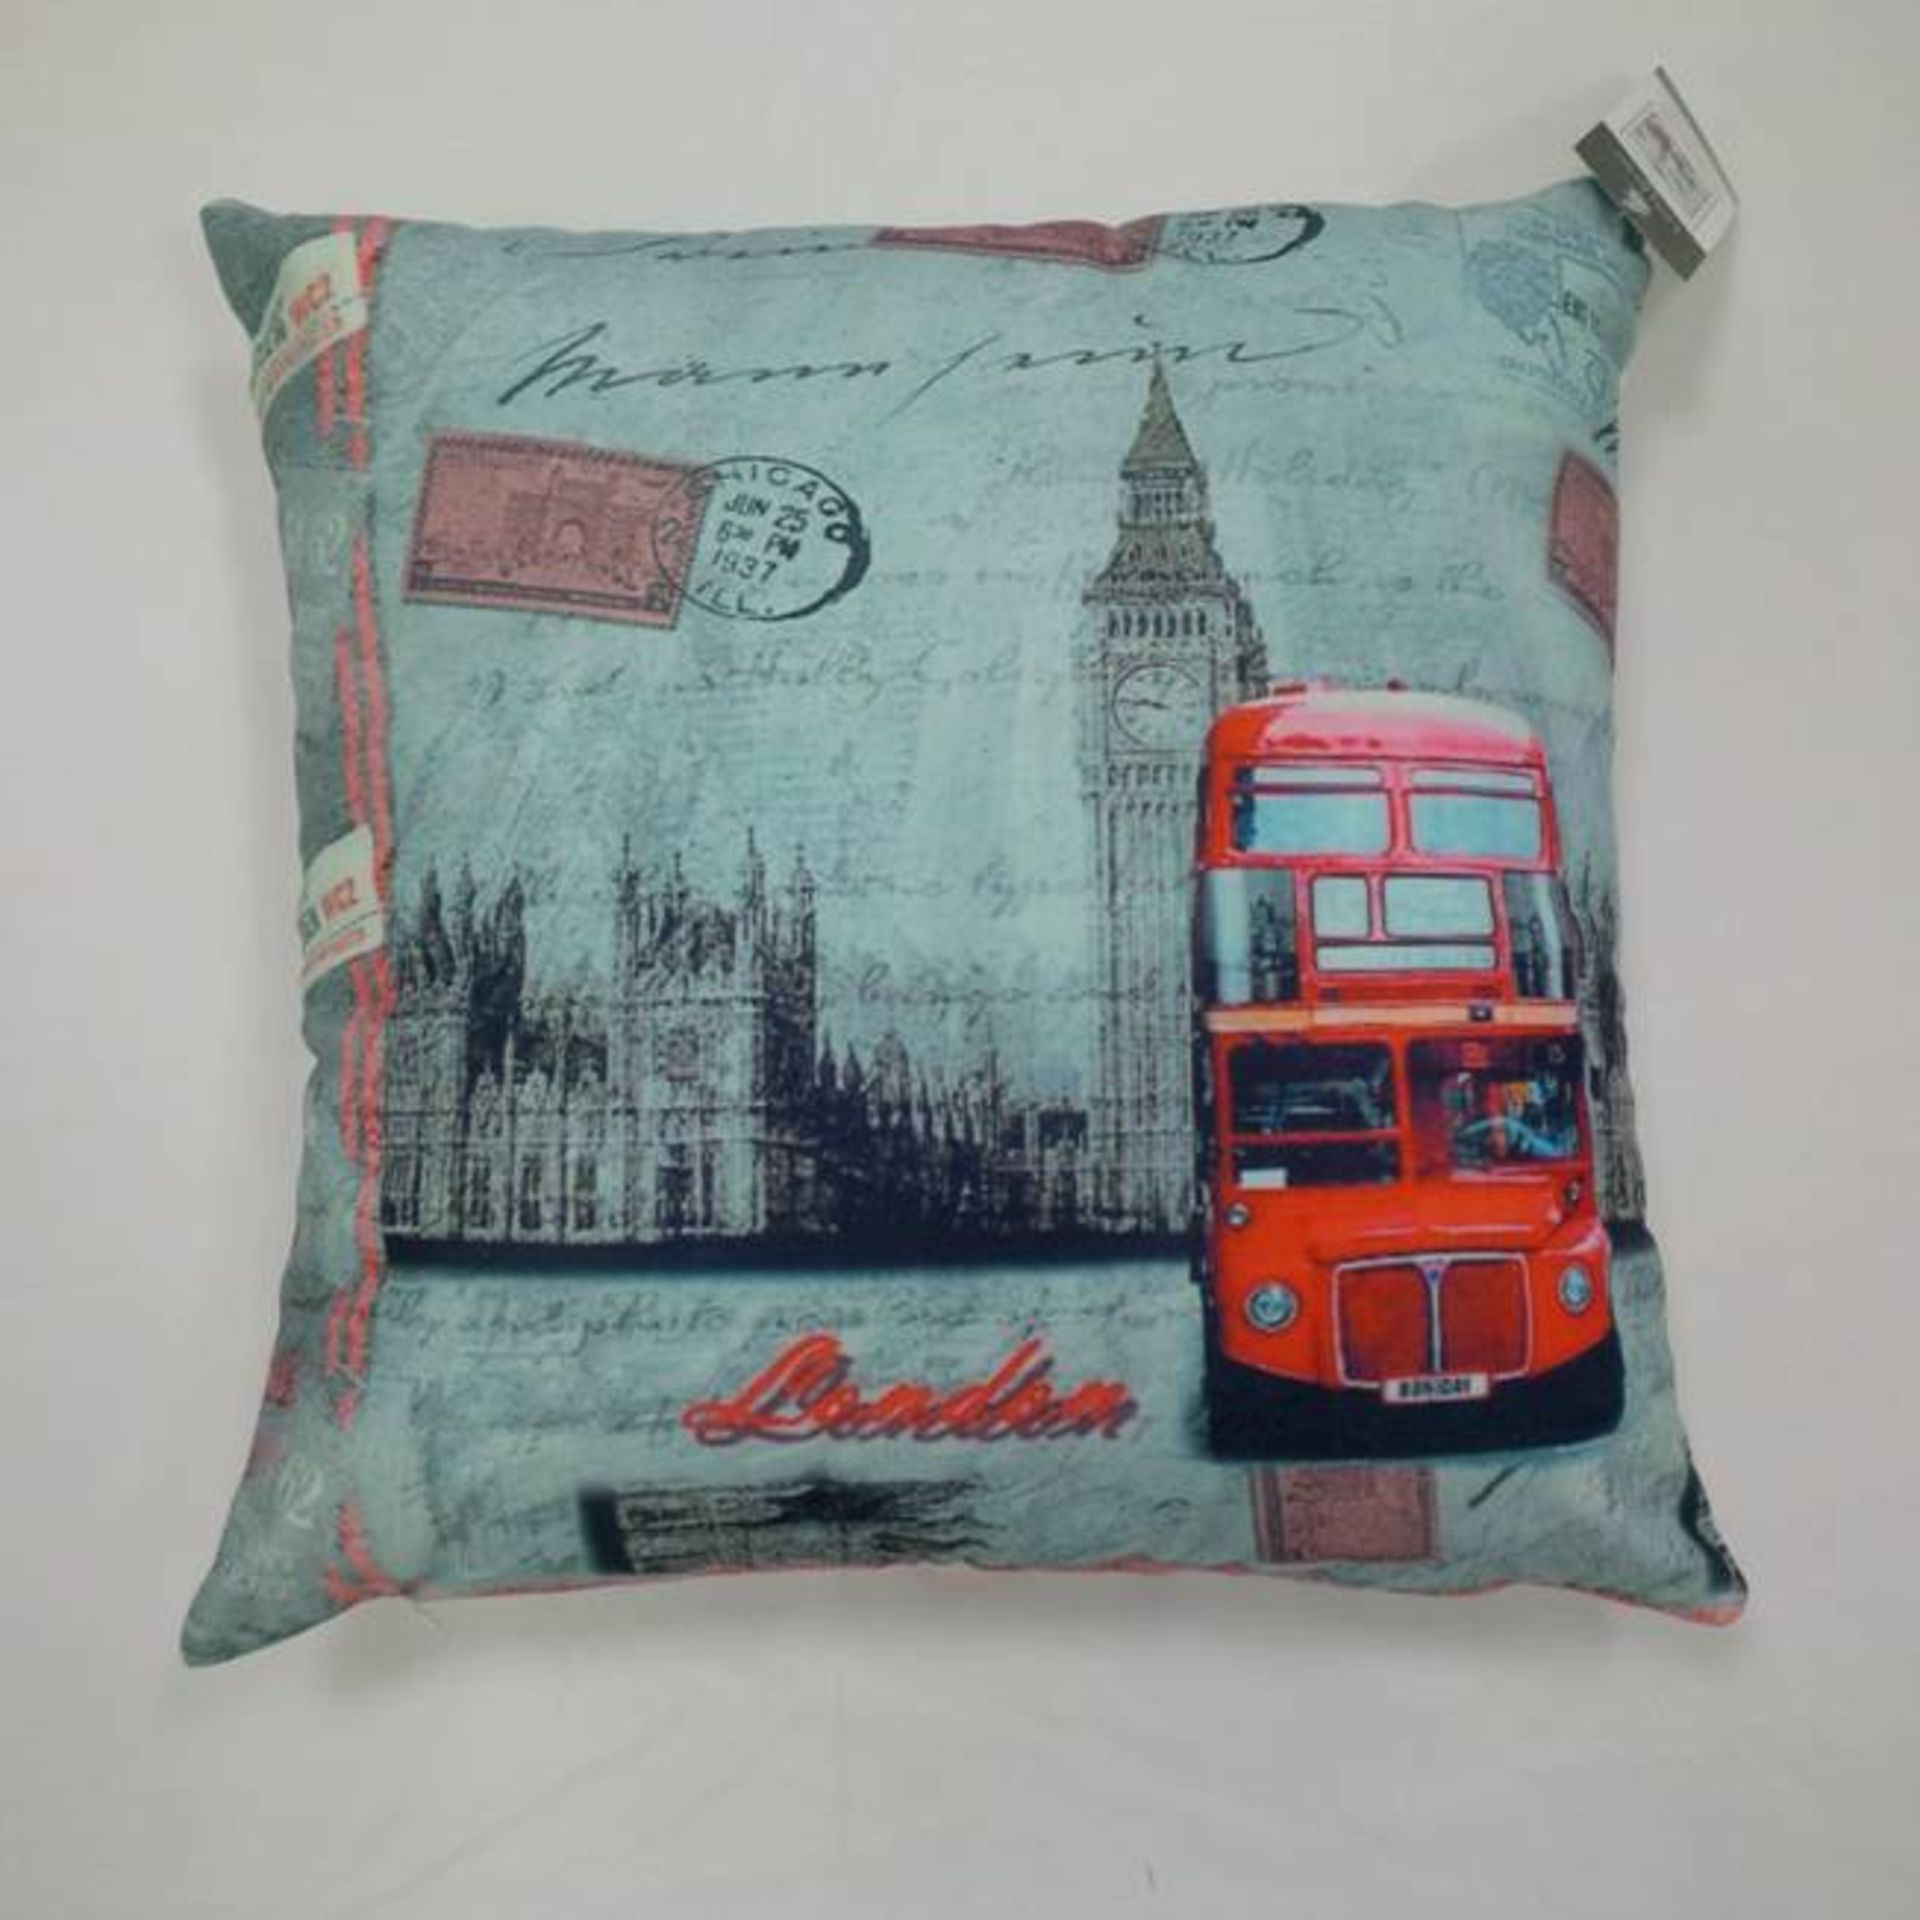 V Brand New Soft Faux Suede Cushion With Printed Picture Of London Routemaster Bus & Big Ben